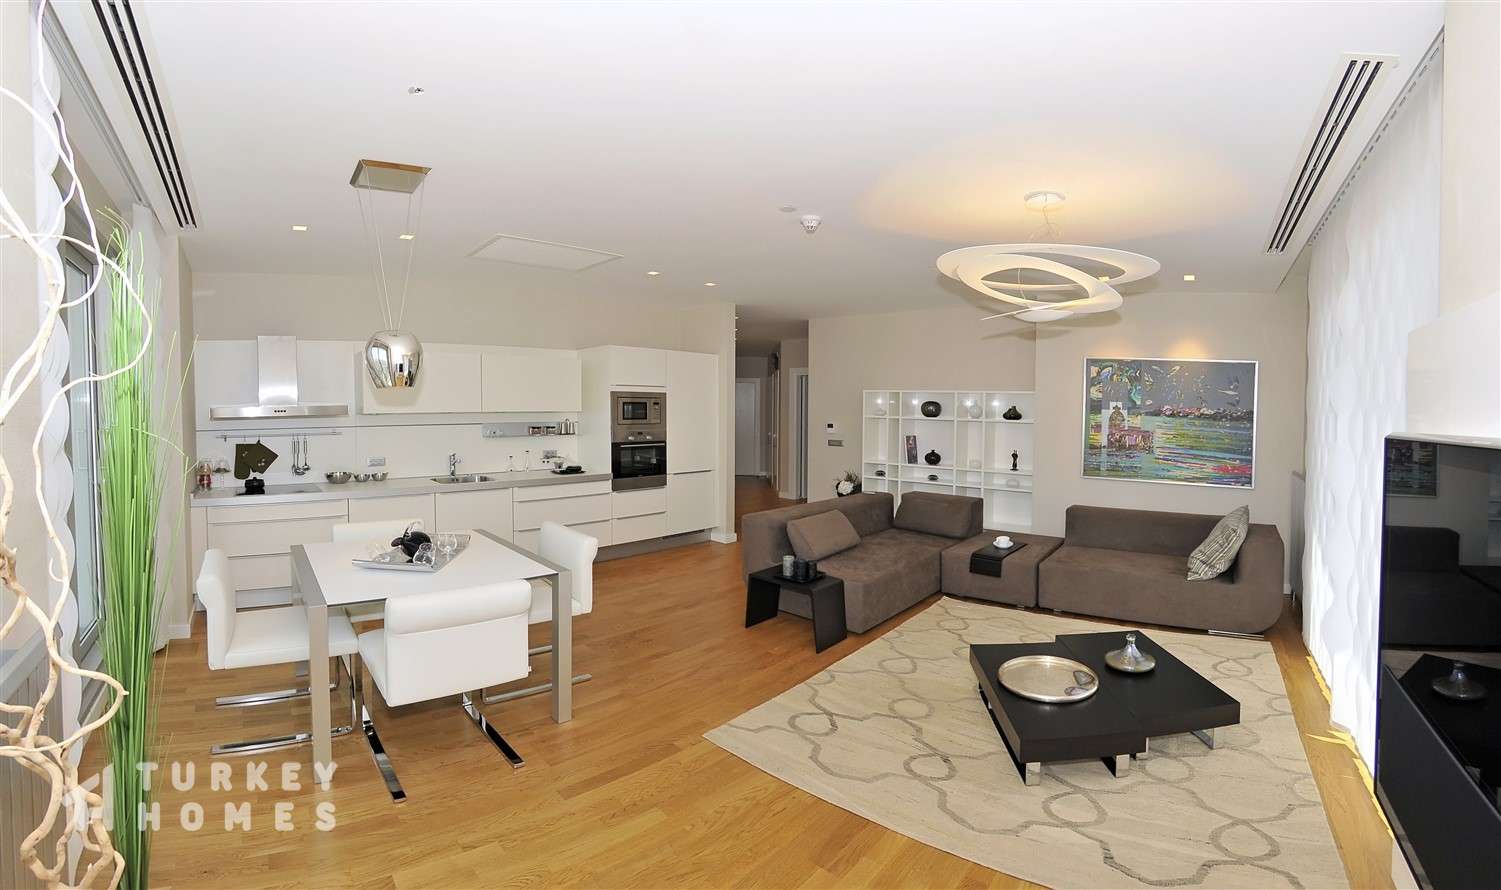 Luxury Istanbul Apartments - Very Spacious Living Areas